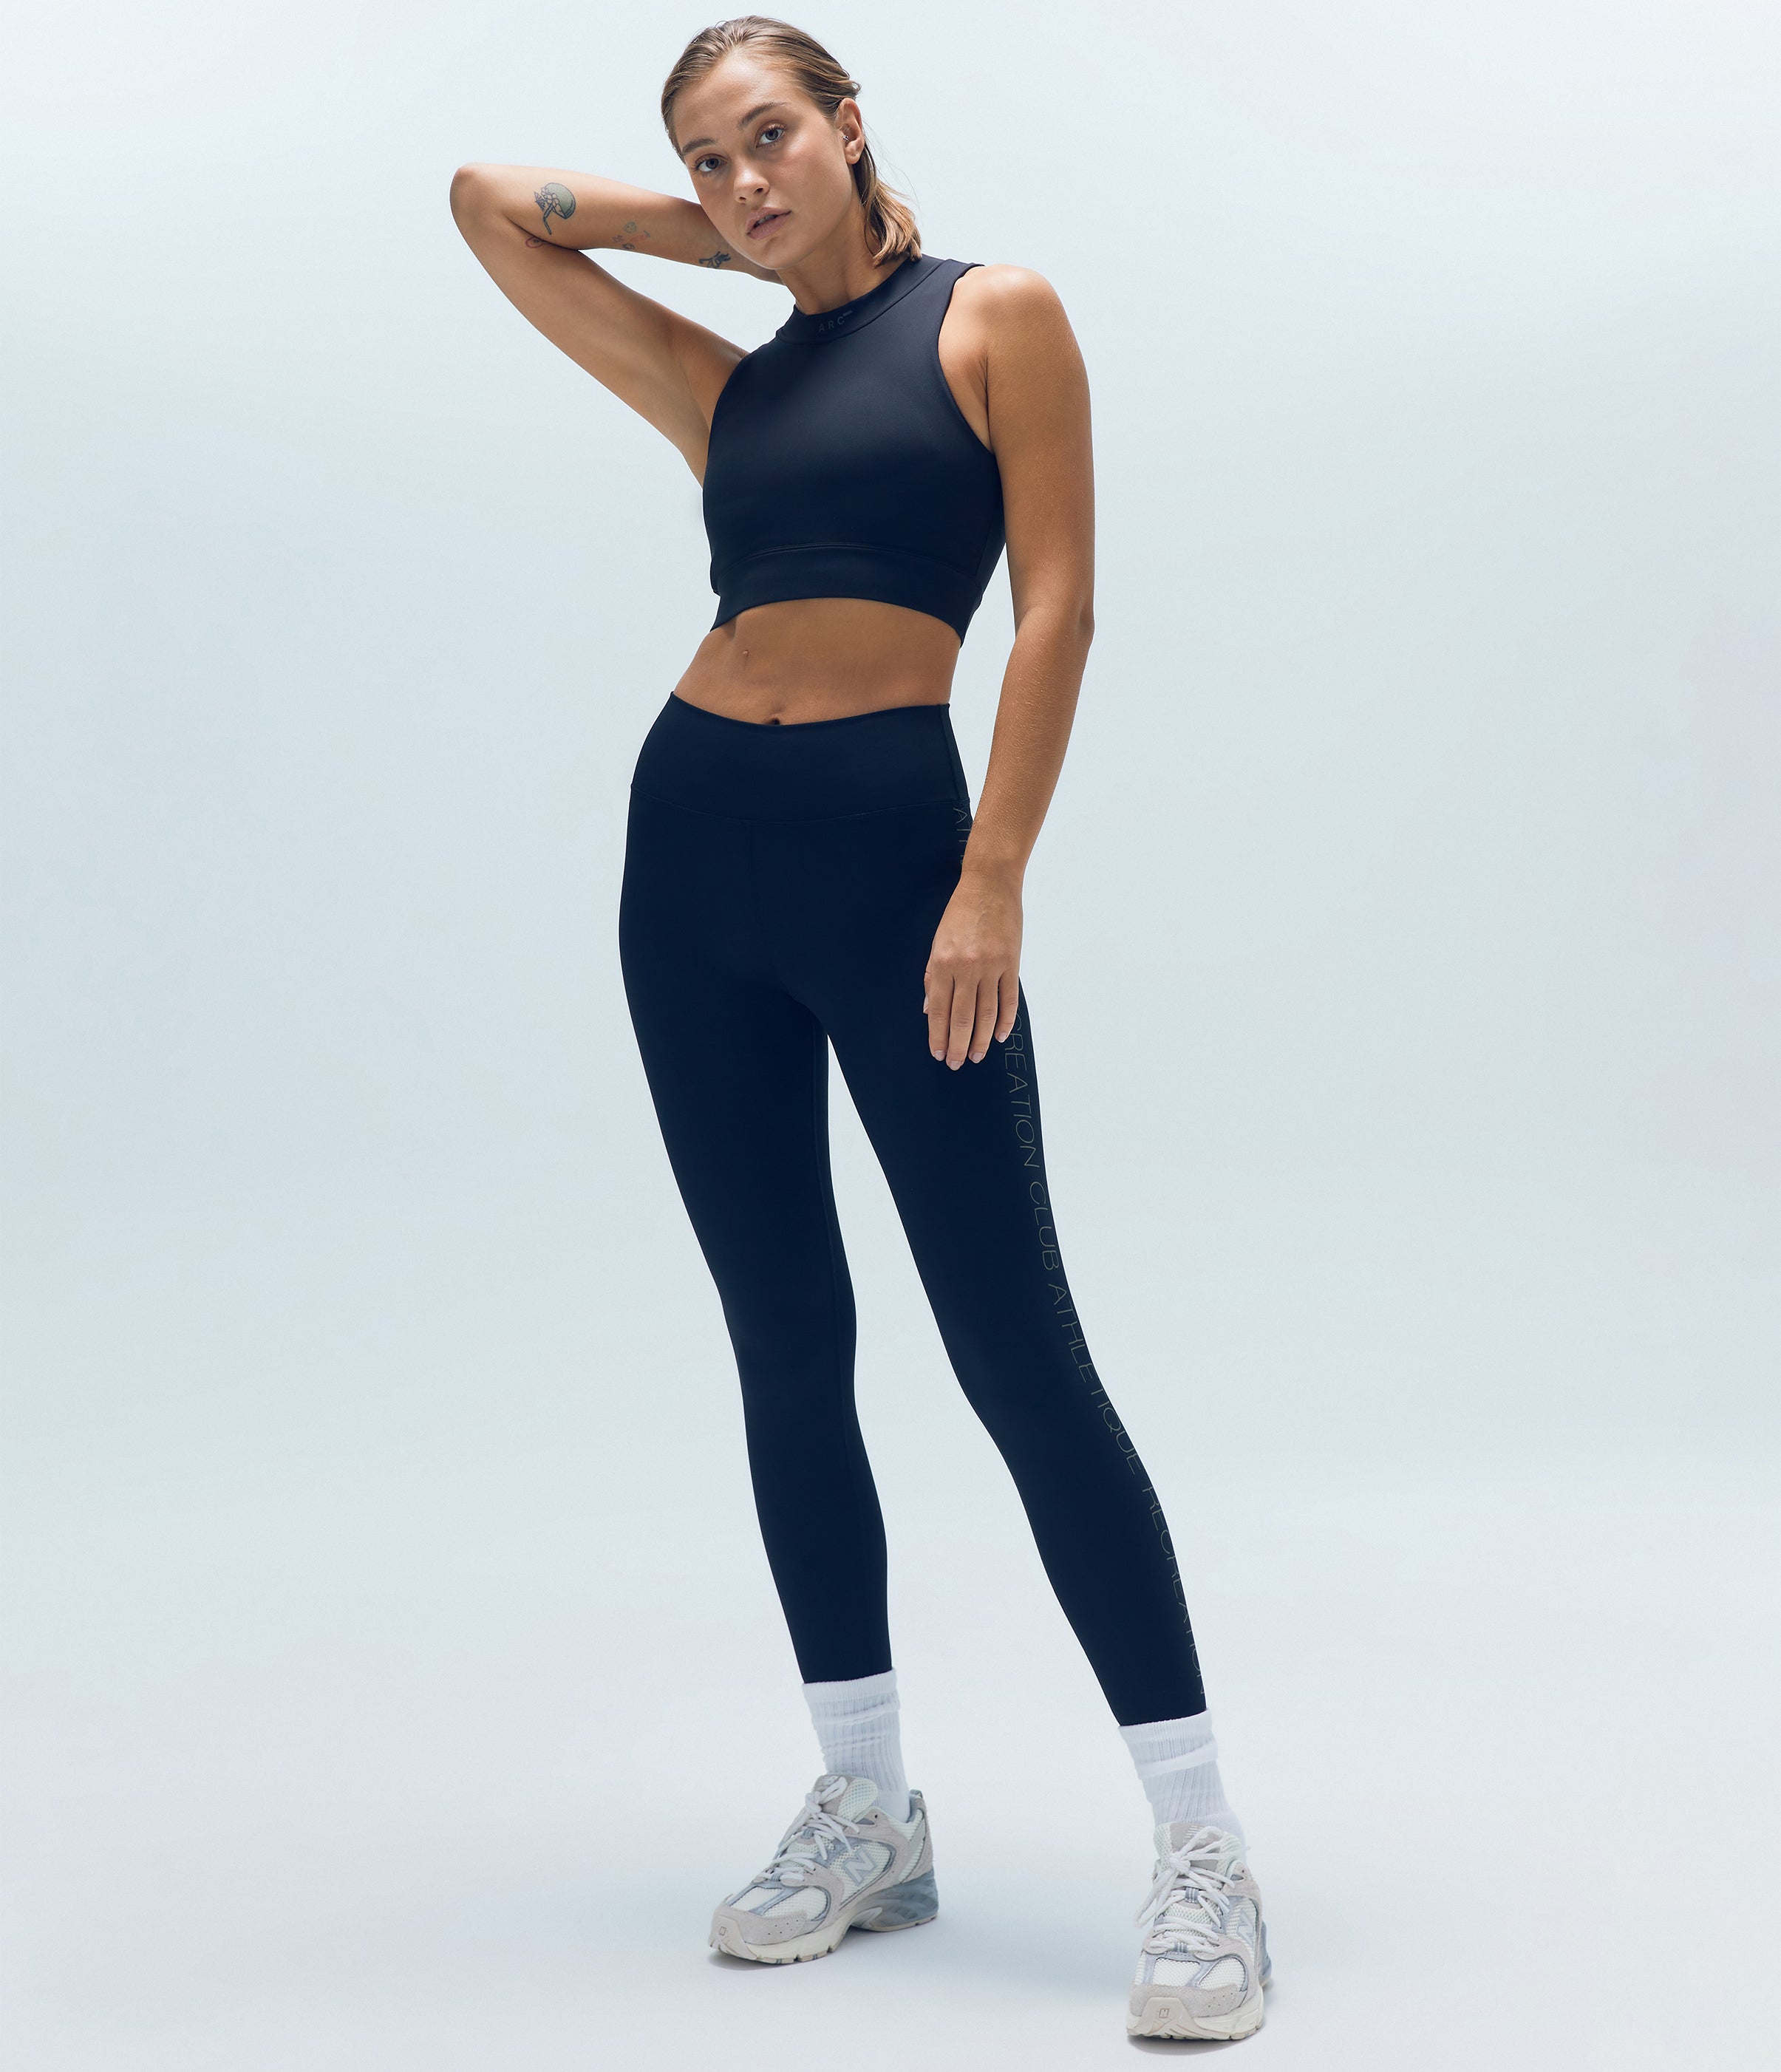 Yoga Clothing: Discover Trendy Apparel for Your Active Lifestyle